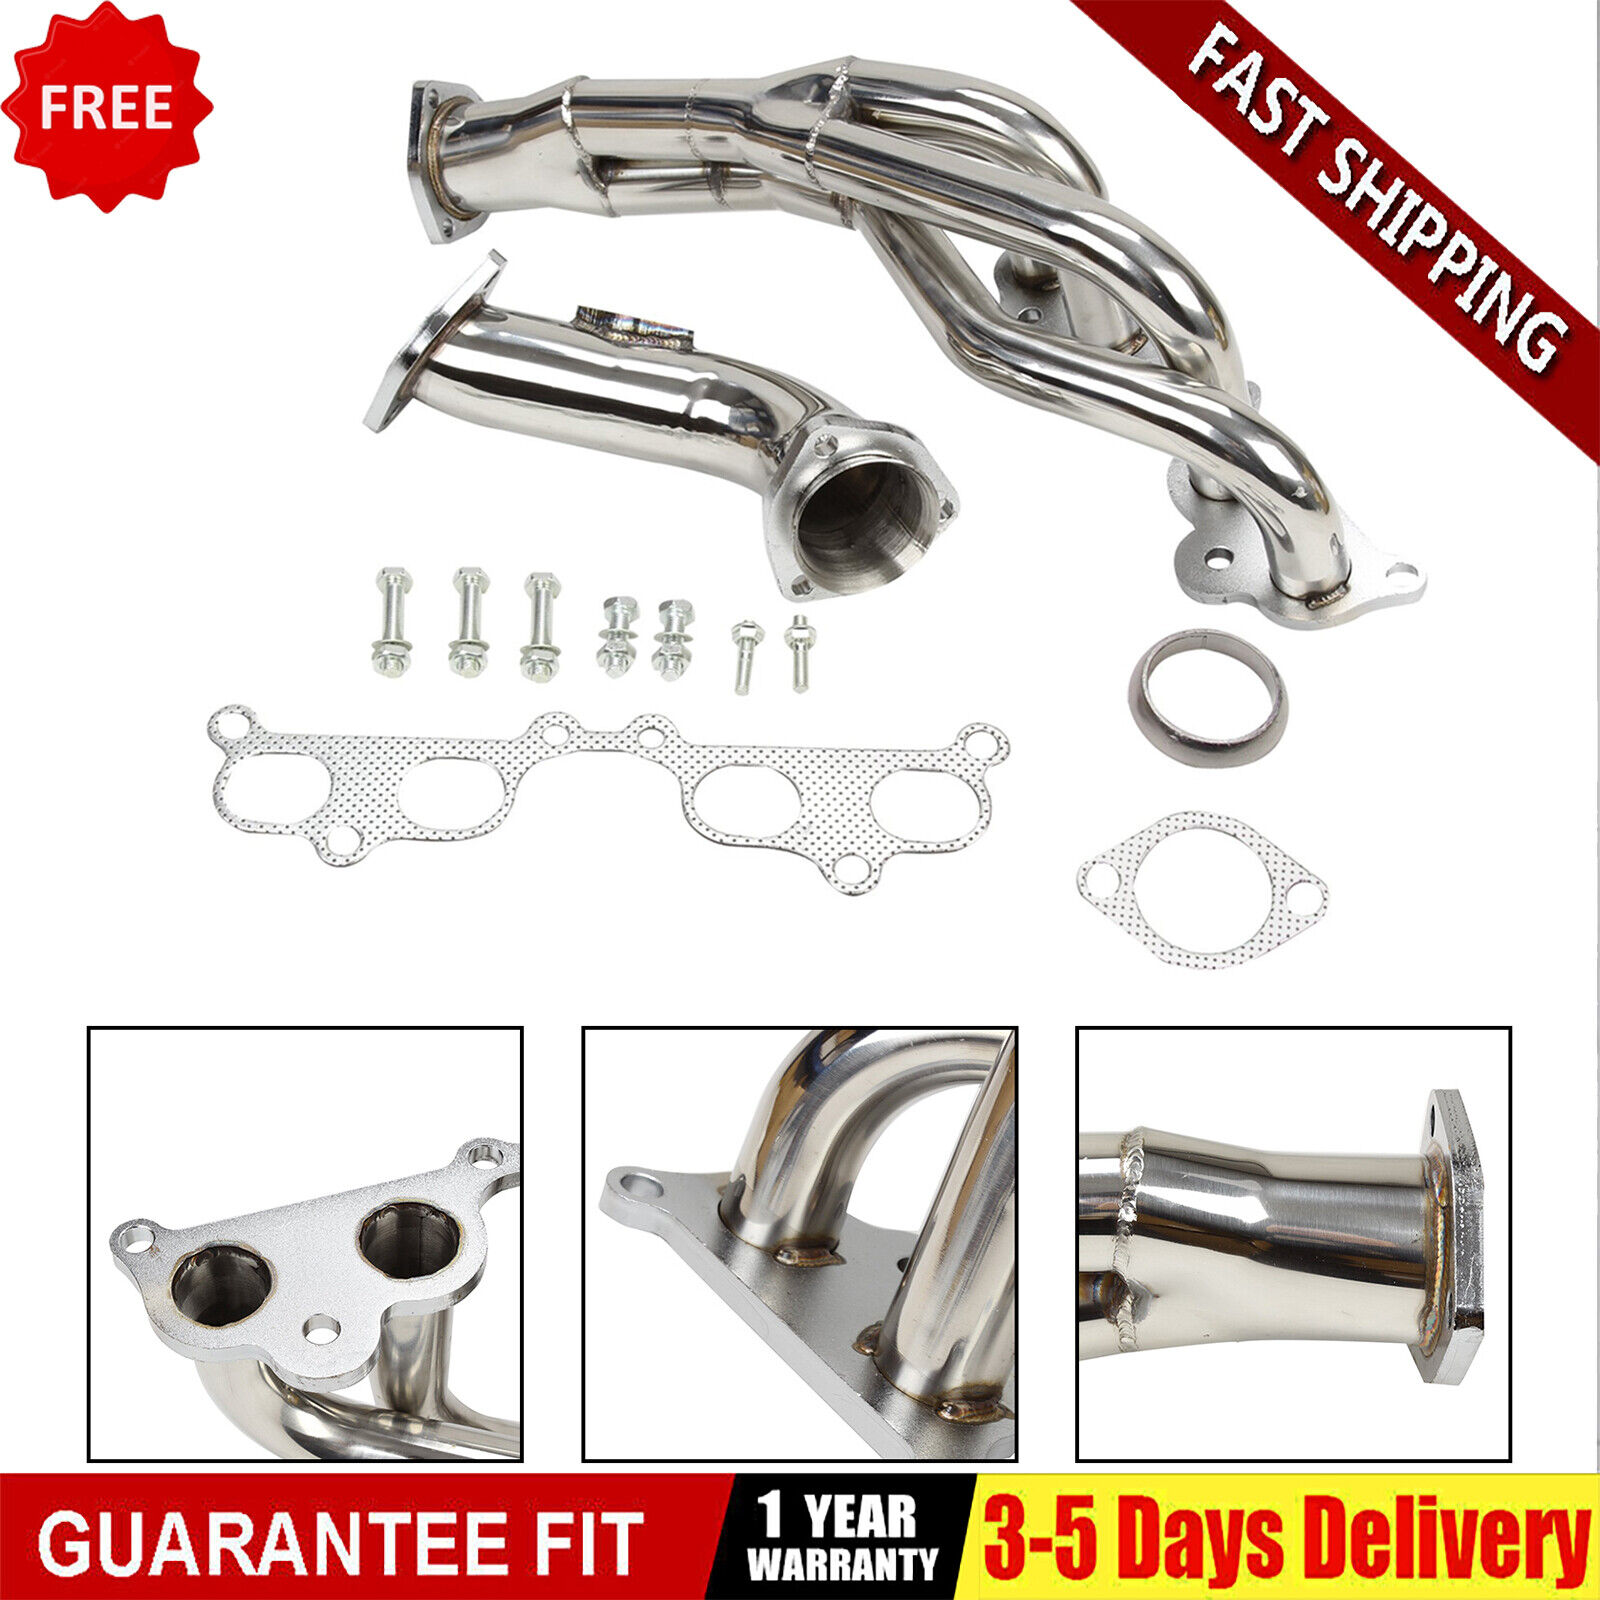 NEW Stainless Exhaust Header Kit Manifold For Toyota Tacoma 2.4L 2.7L L4 1995-01